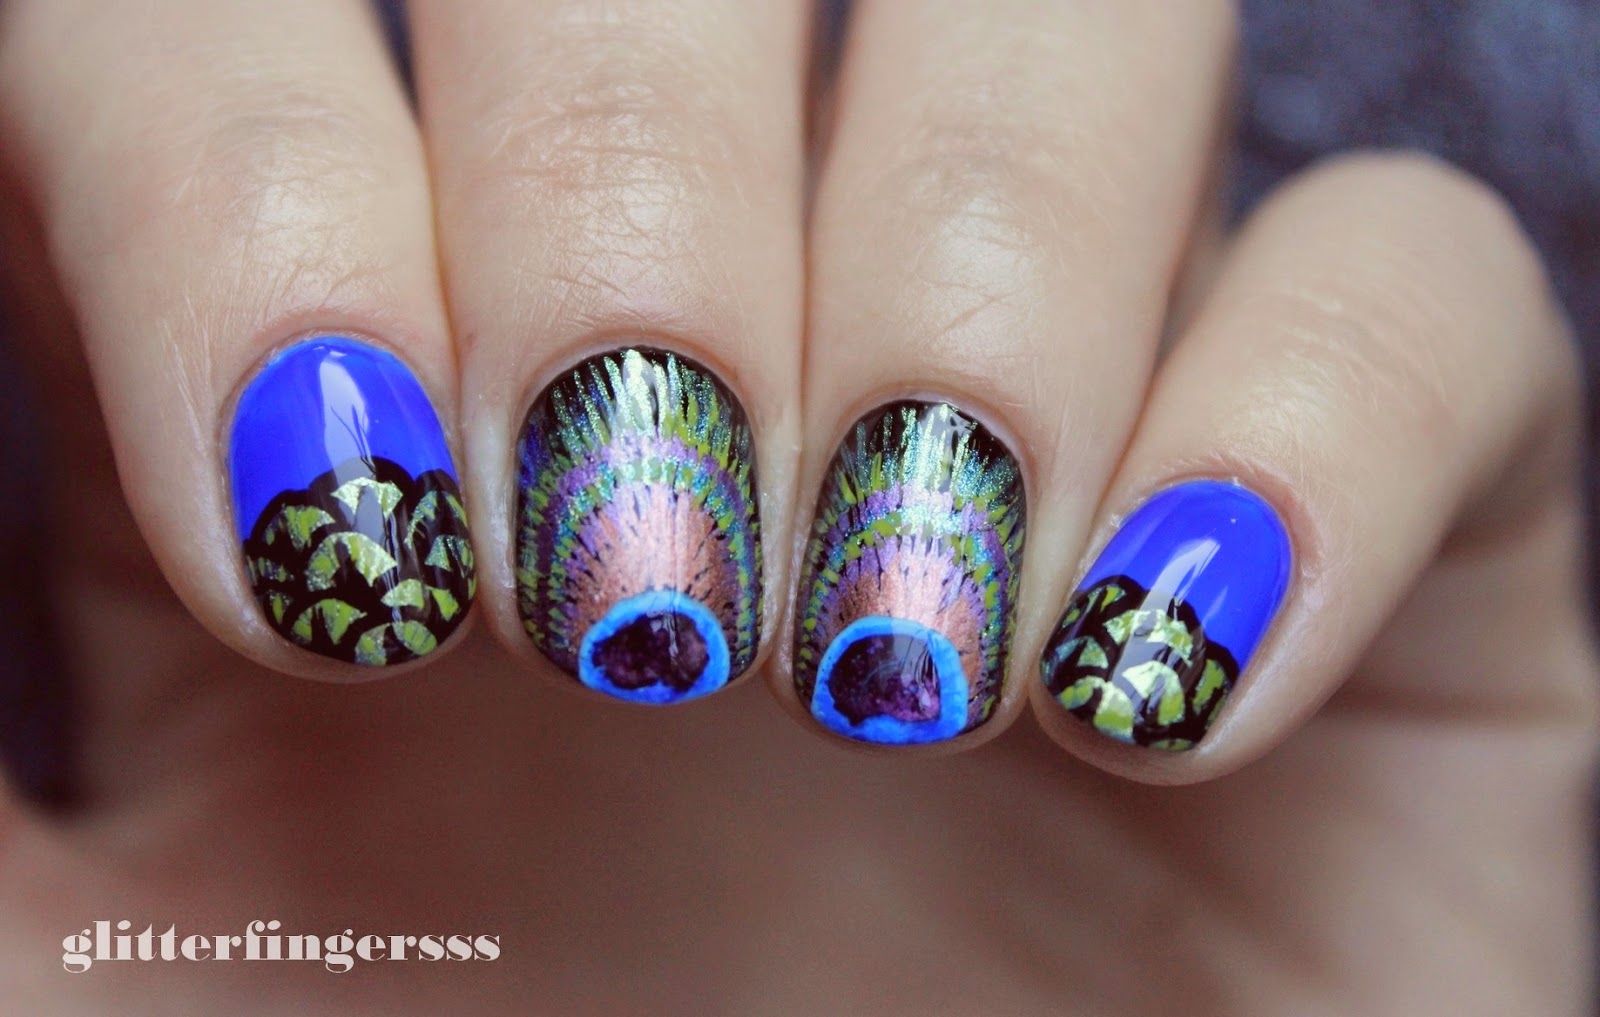 3. "Step-by-Step Peacock Nail Art Design" - wide 3